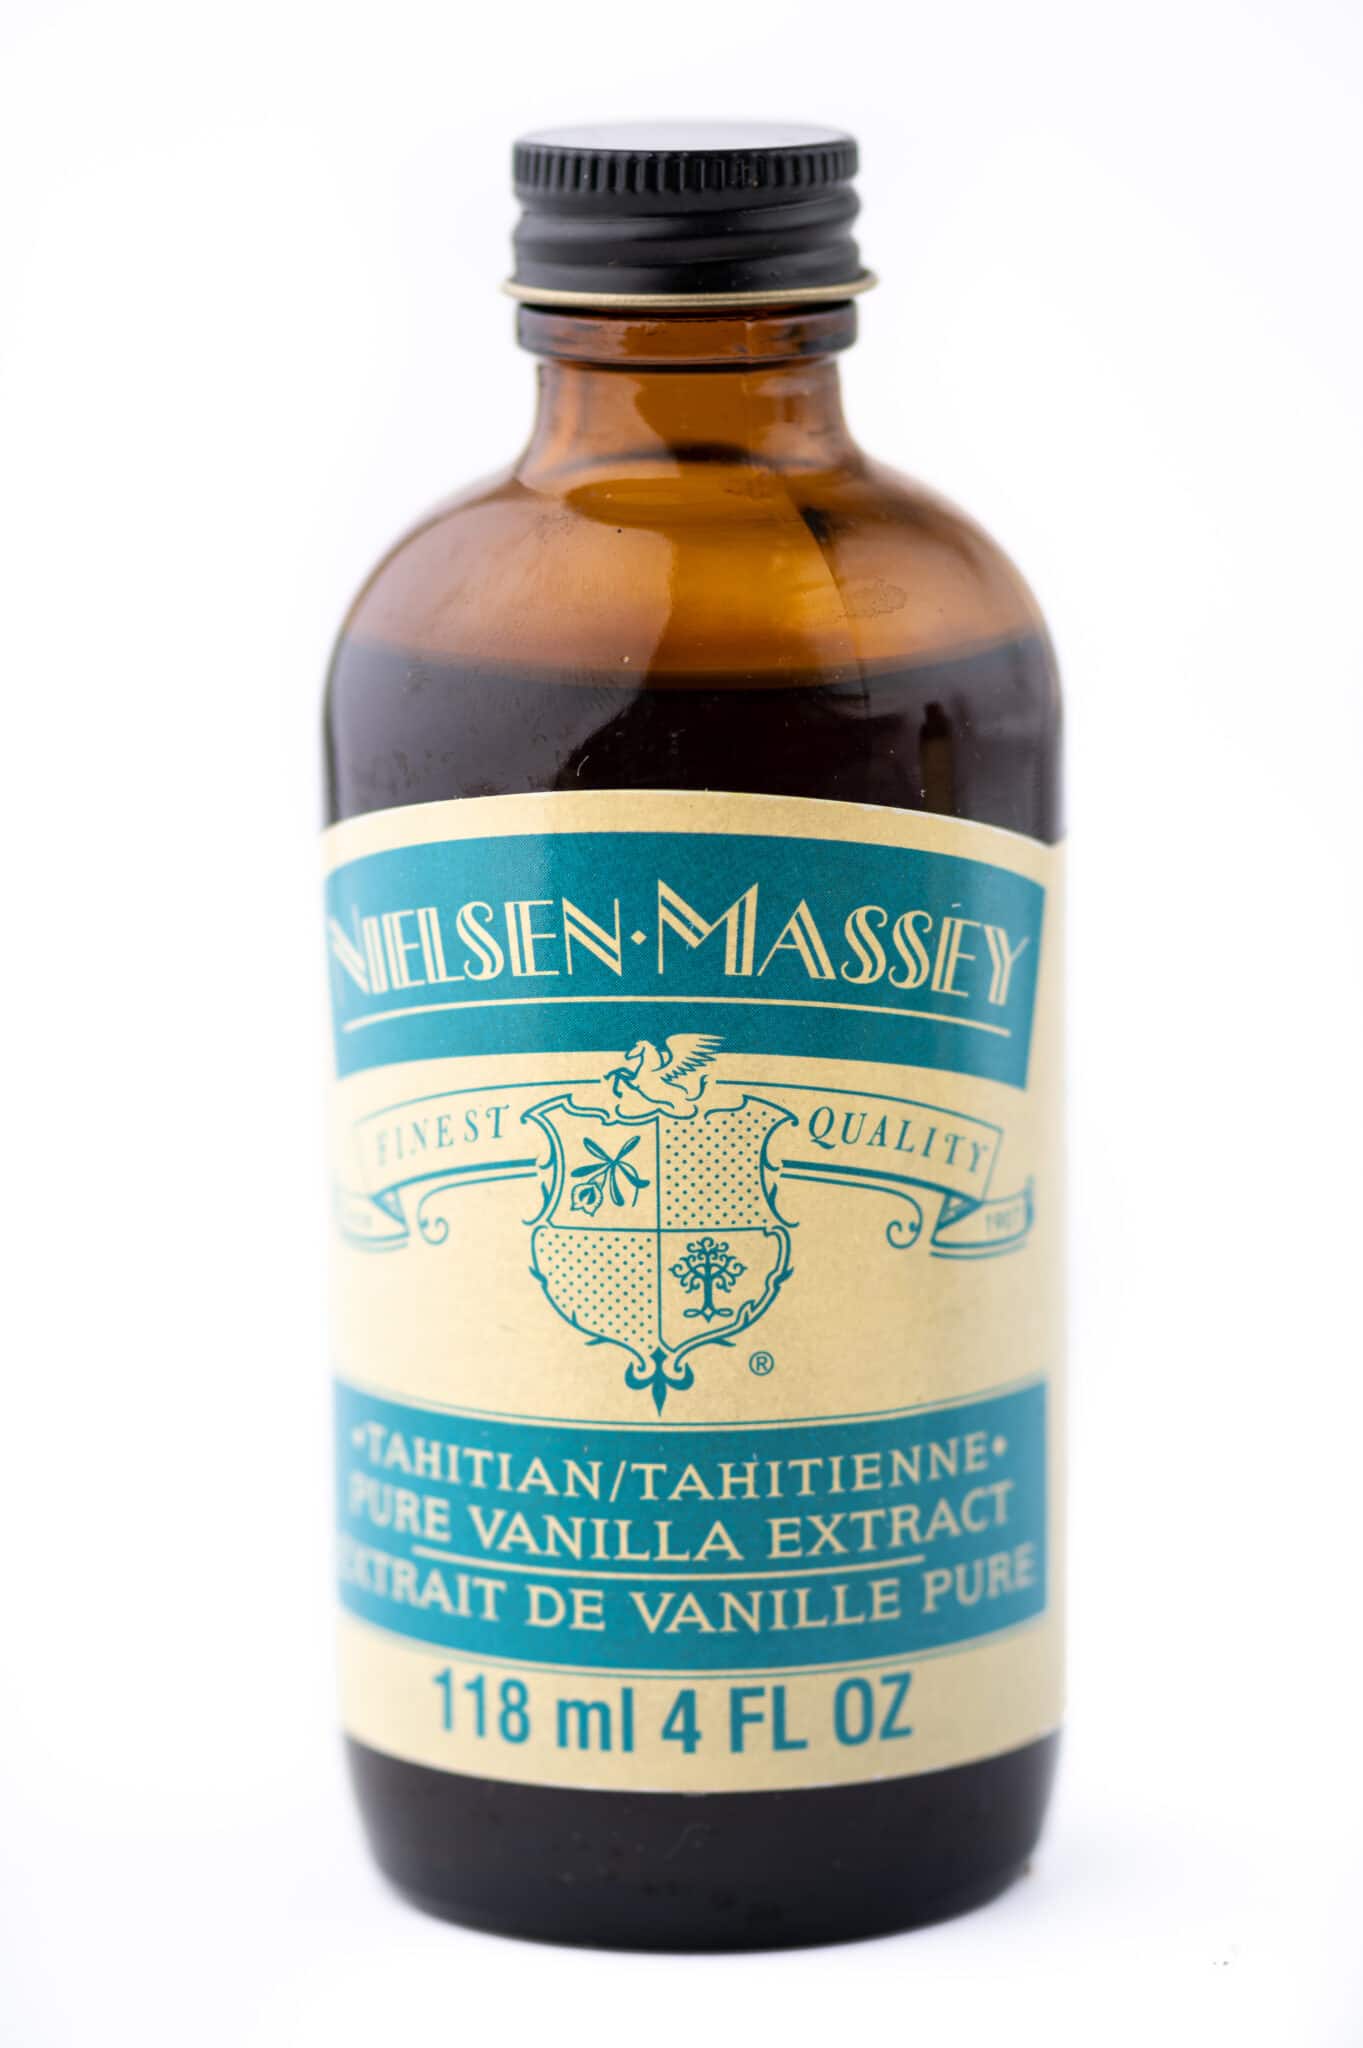 A bottle of Tahitian vanilla with a blue label against a bright white background.